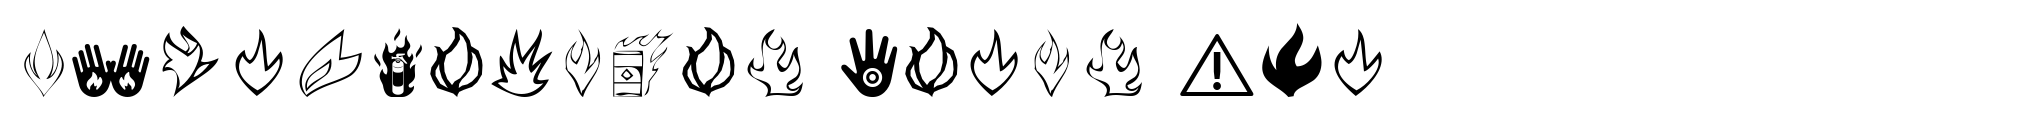 Pyrotechnics Icons Two image